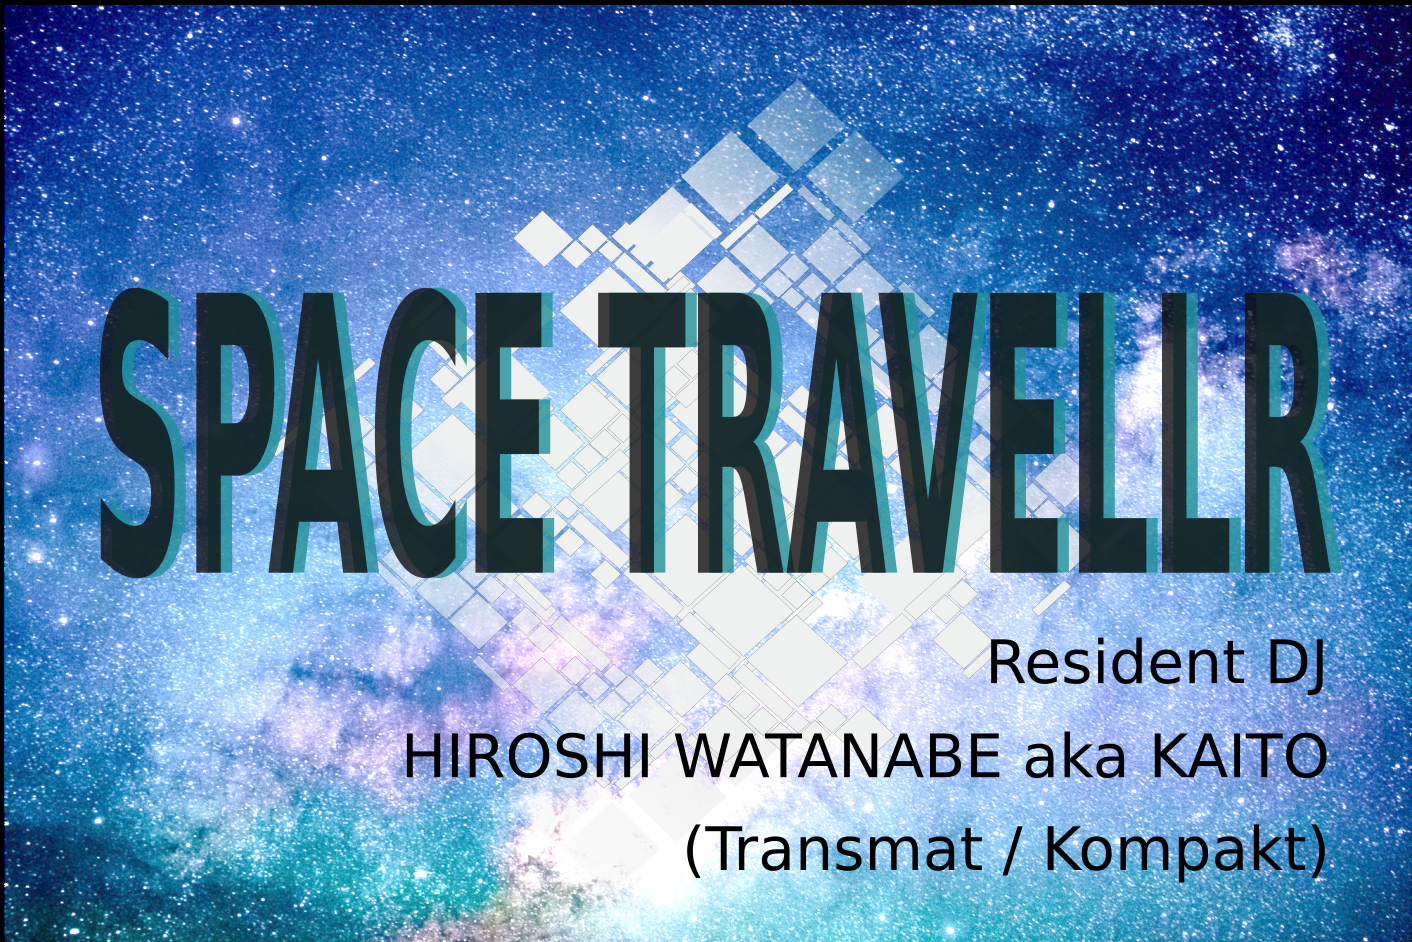 Re : Space Traveller